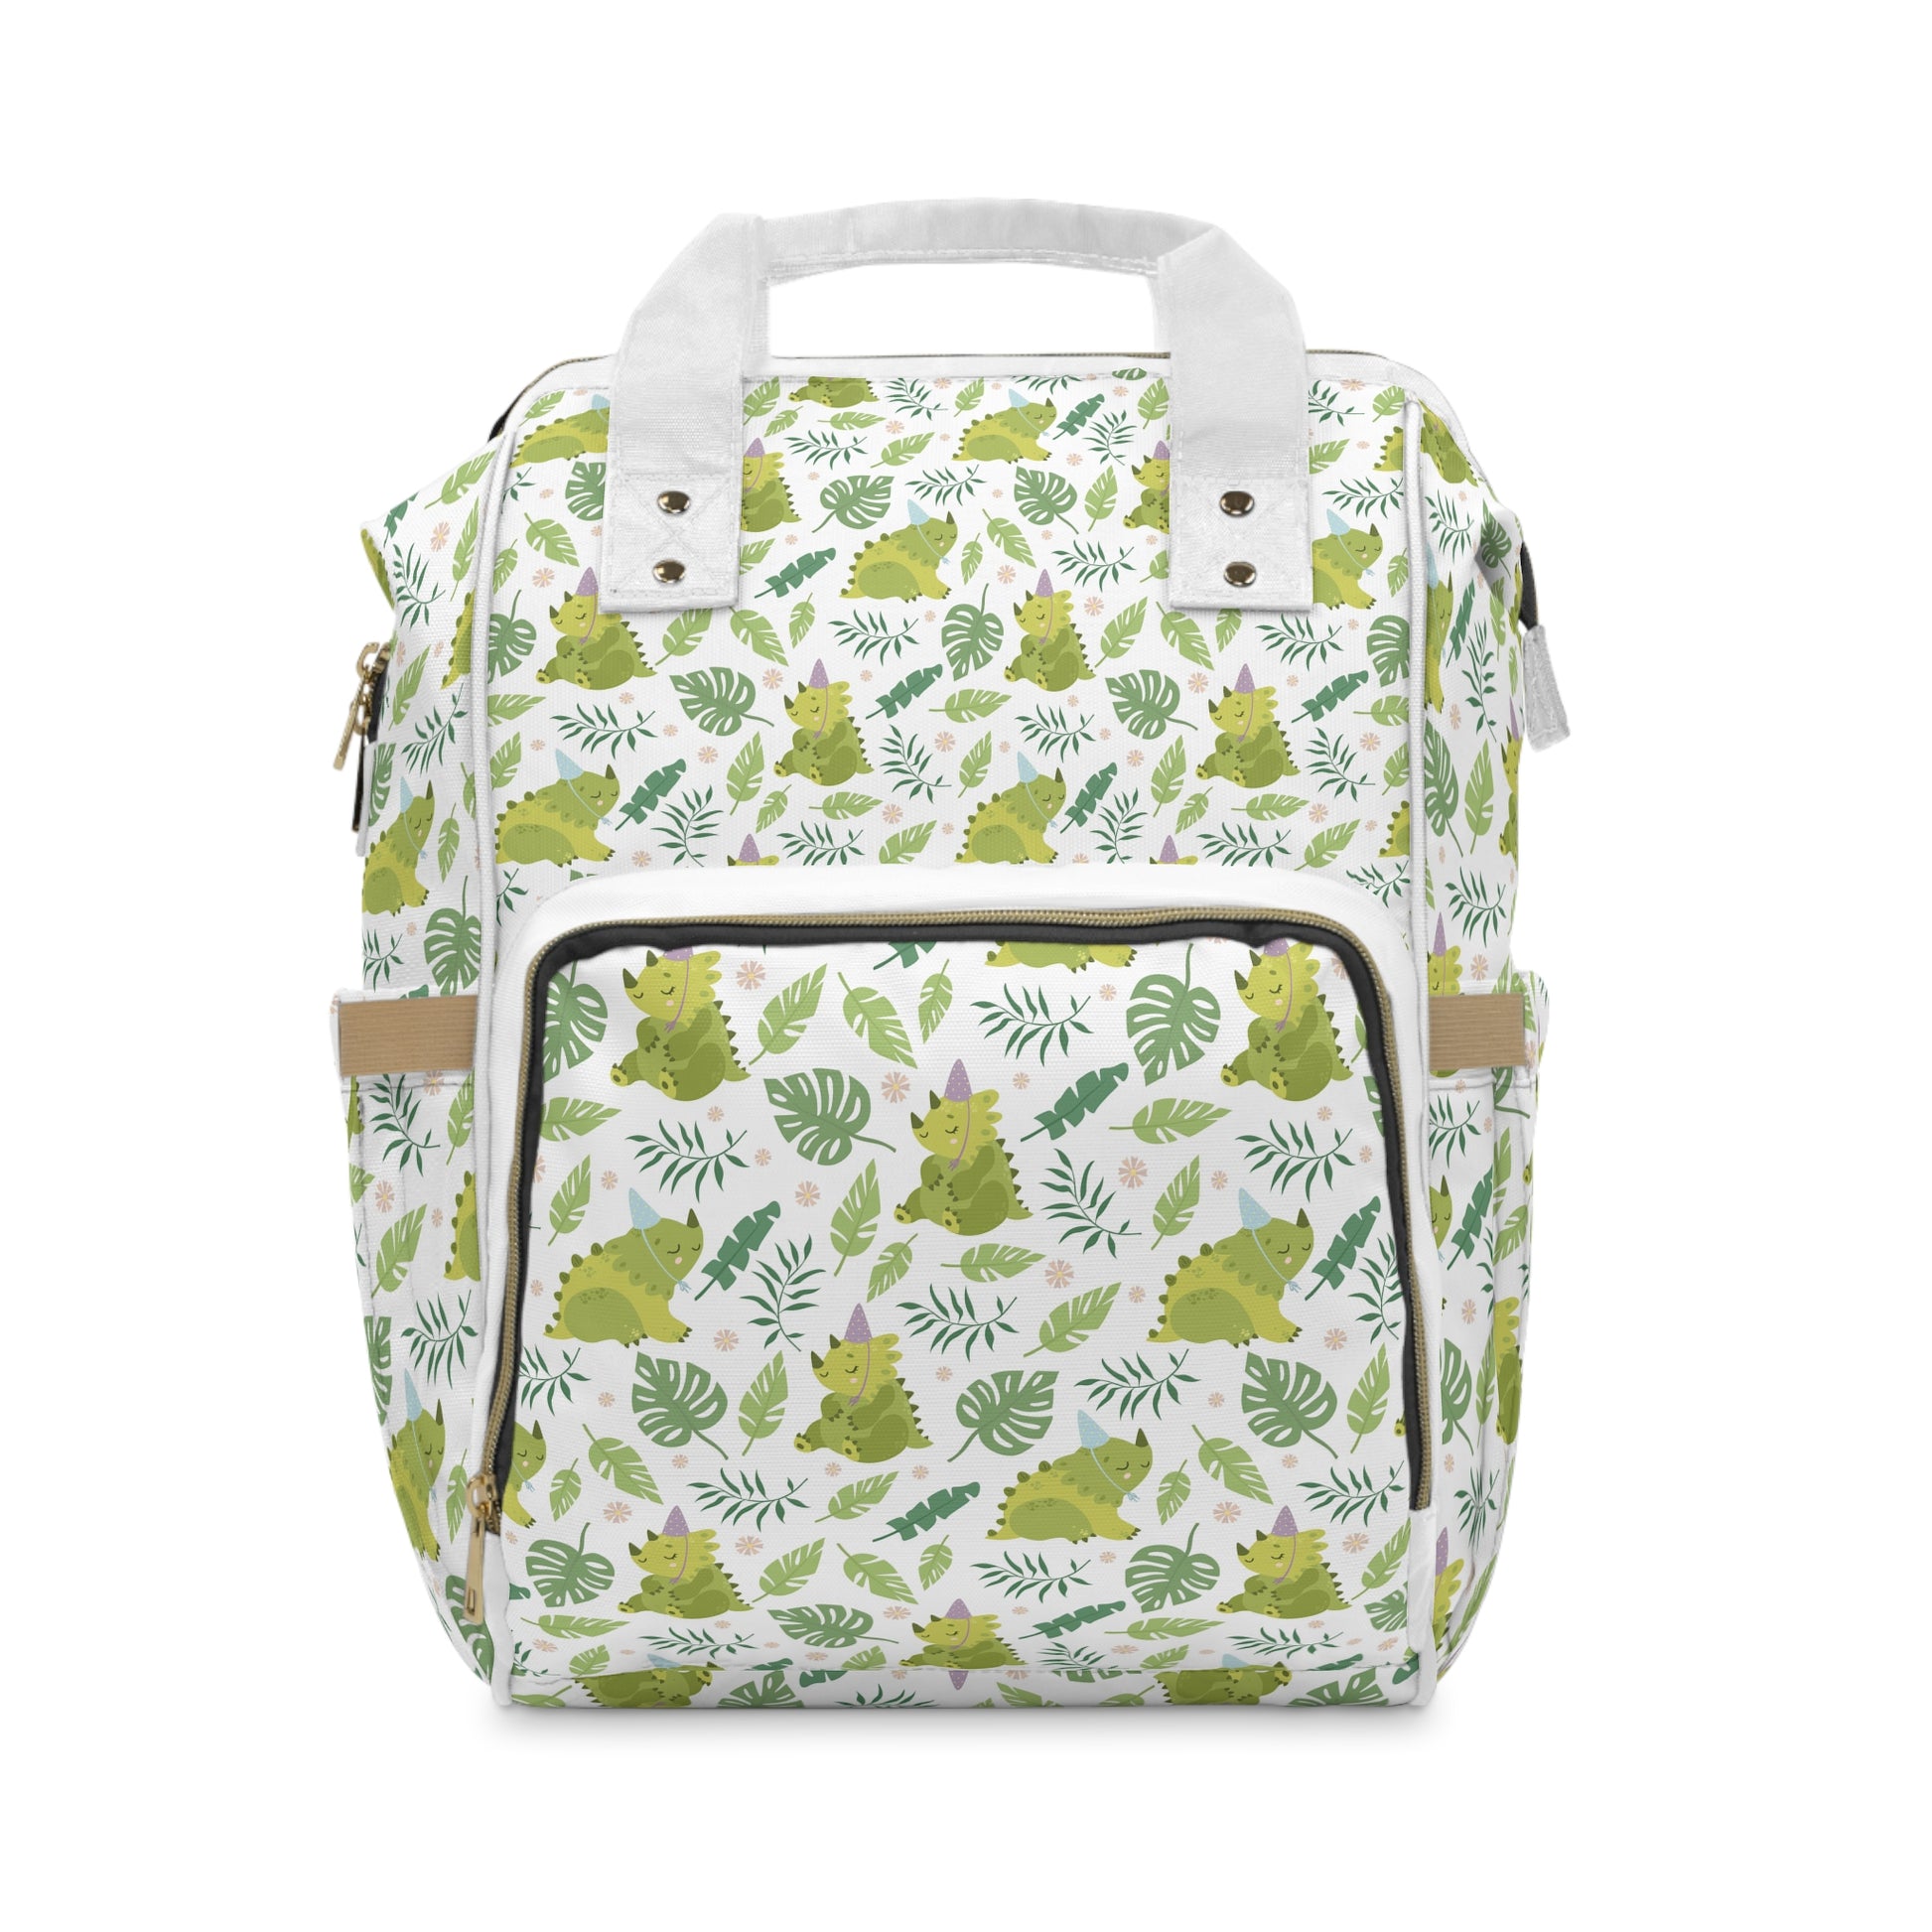 Adorable Green Dino: Stylish Backpack with Palm Leaf Pattern